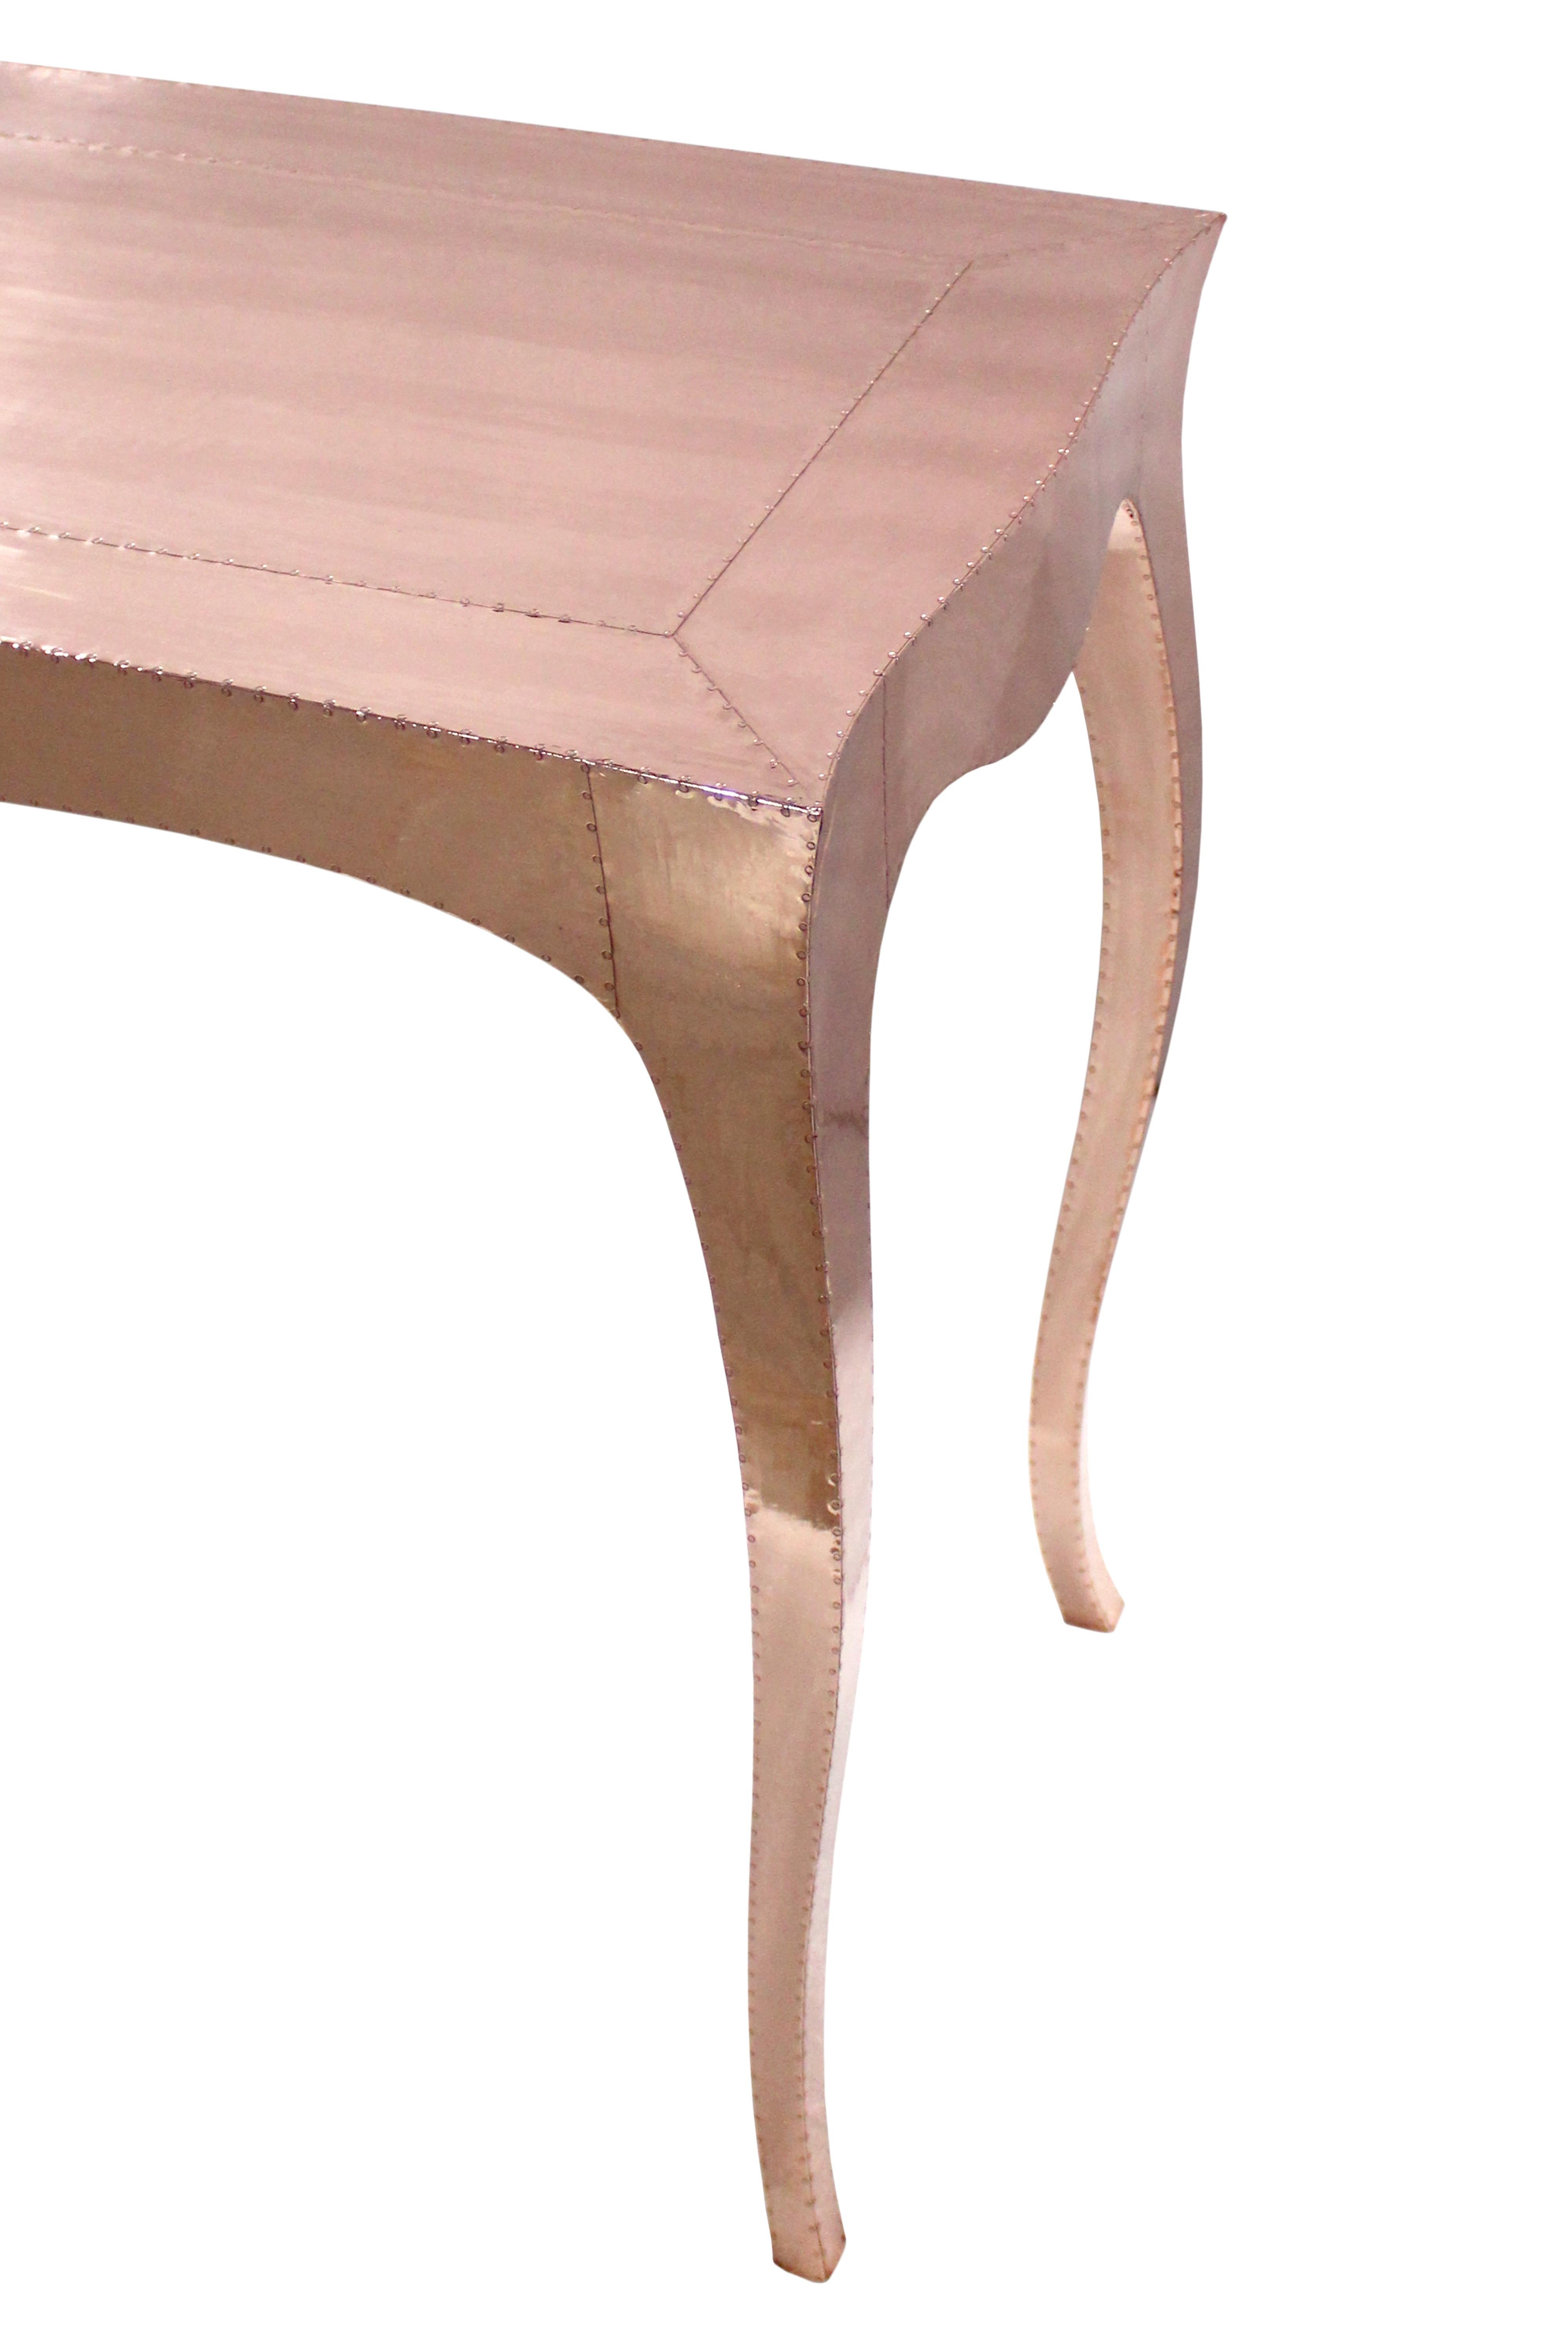 Other Louise Console Table in Copper by Paul Mathieu for Stephanie Odegard For Sale